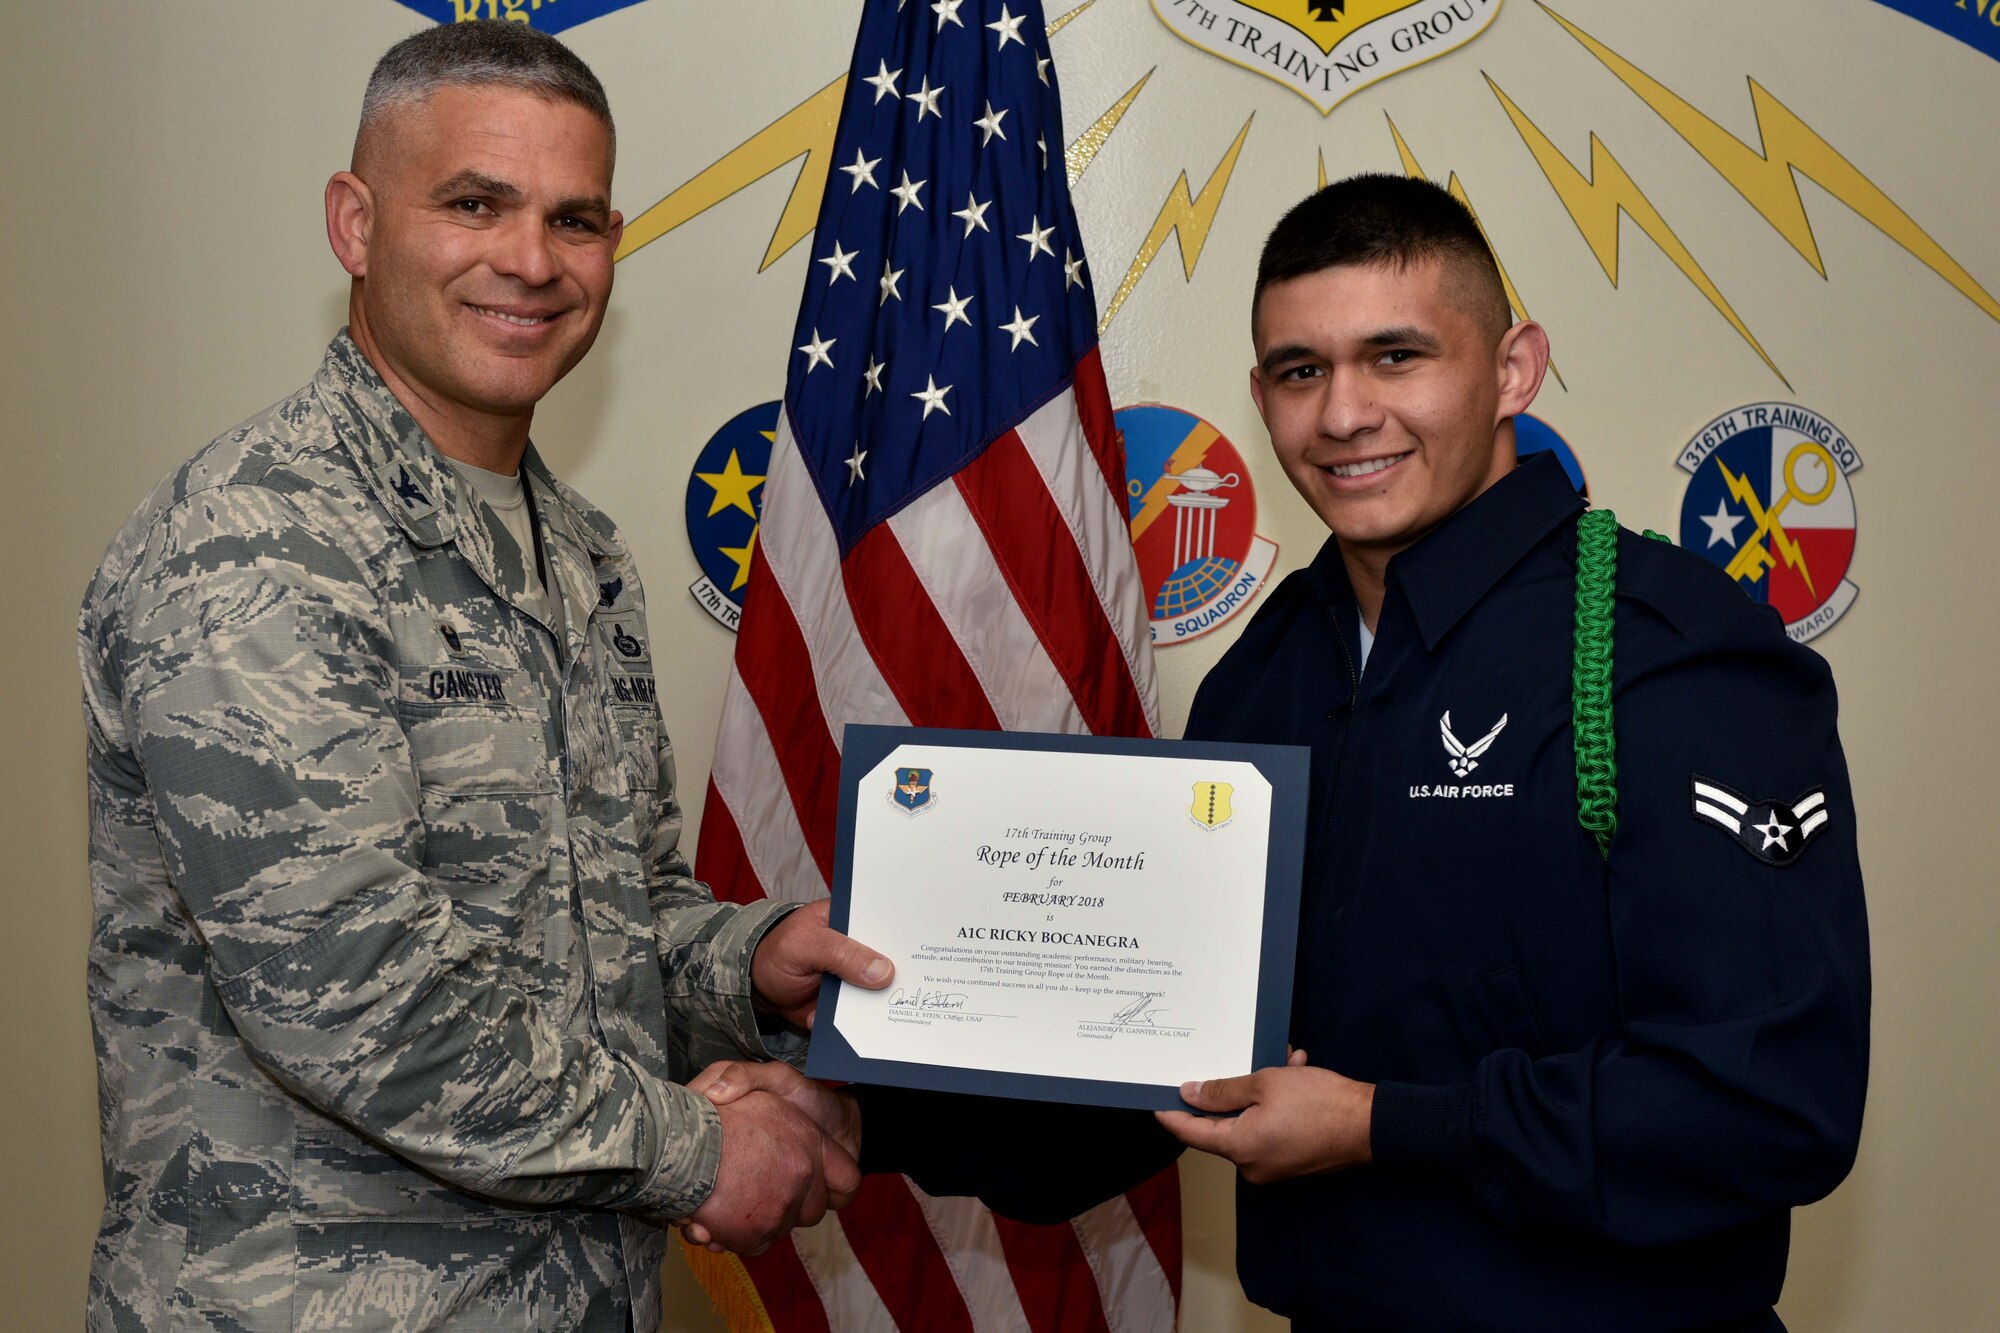 U.S. Air Force Col. Alex Ganster, 17th Training Group commander, presents the 17th TRG Rope of the Month certificate to Airman 1st Class Ricky Bocanegra, 315th Training Squadron trainee, in Brandenburg Hall on Goodfellow Air Force Base, Texas, March 2, 2018.  The mission of the 17th TRG is to train, develop and inspire professional fire protection and intelligence, surveillance and reconnaissance warriors. (U.S. Air Force photo by Senior Airman Randall Moose/Released)